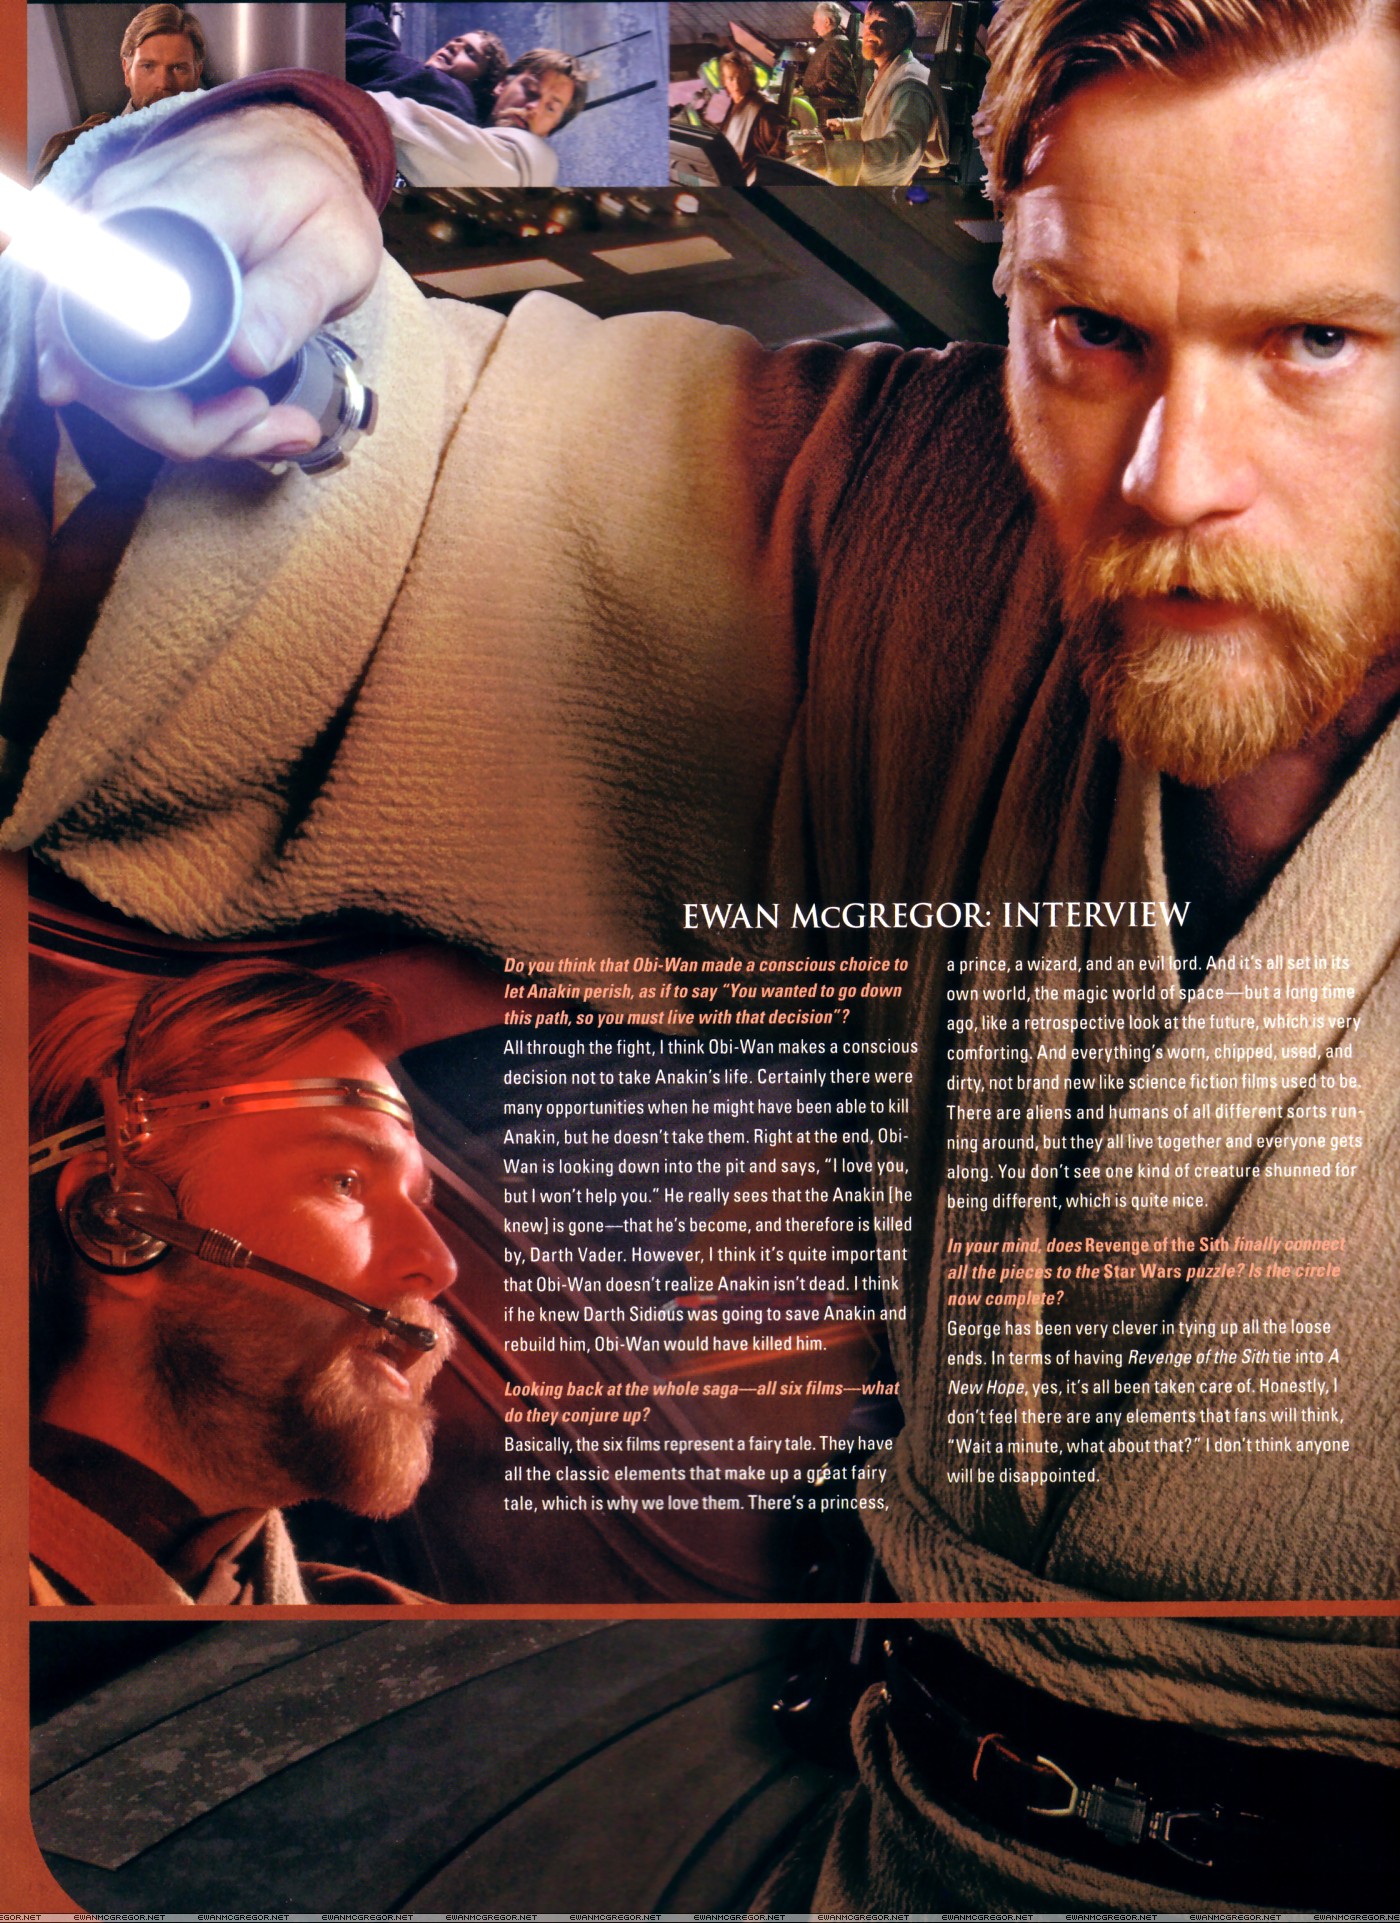 Star-Wars-Episode-III-Revenge-of-the-Sith-Extras-Souvenir-Guide-002.jpg